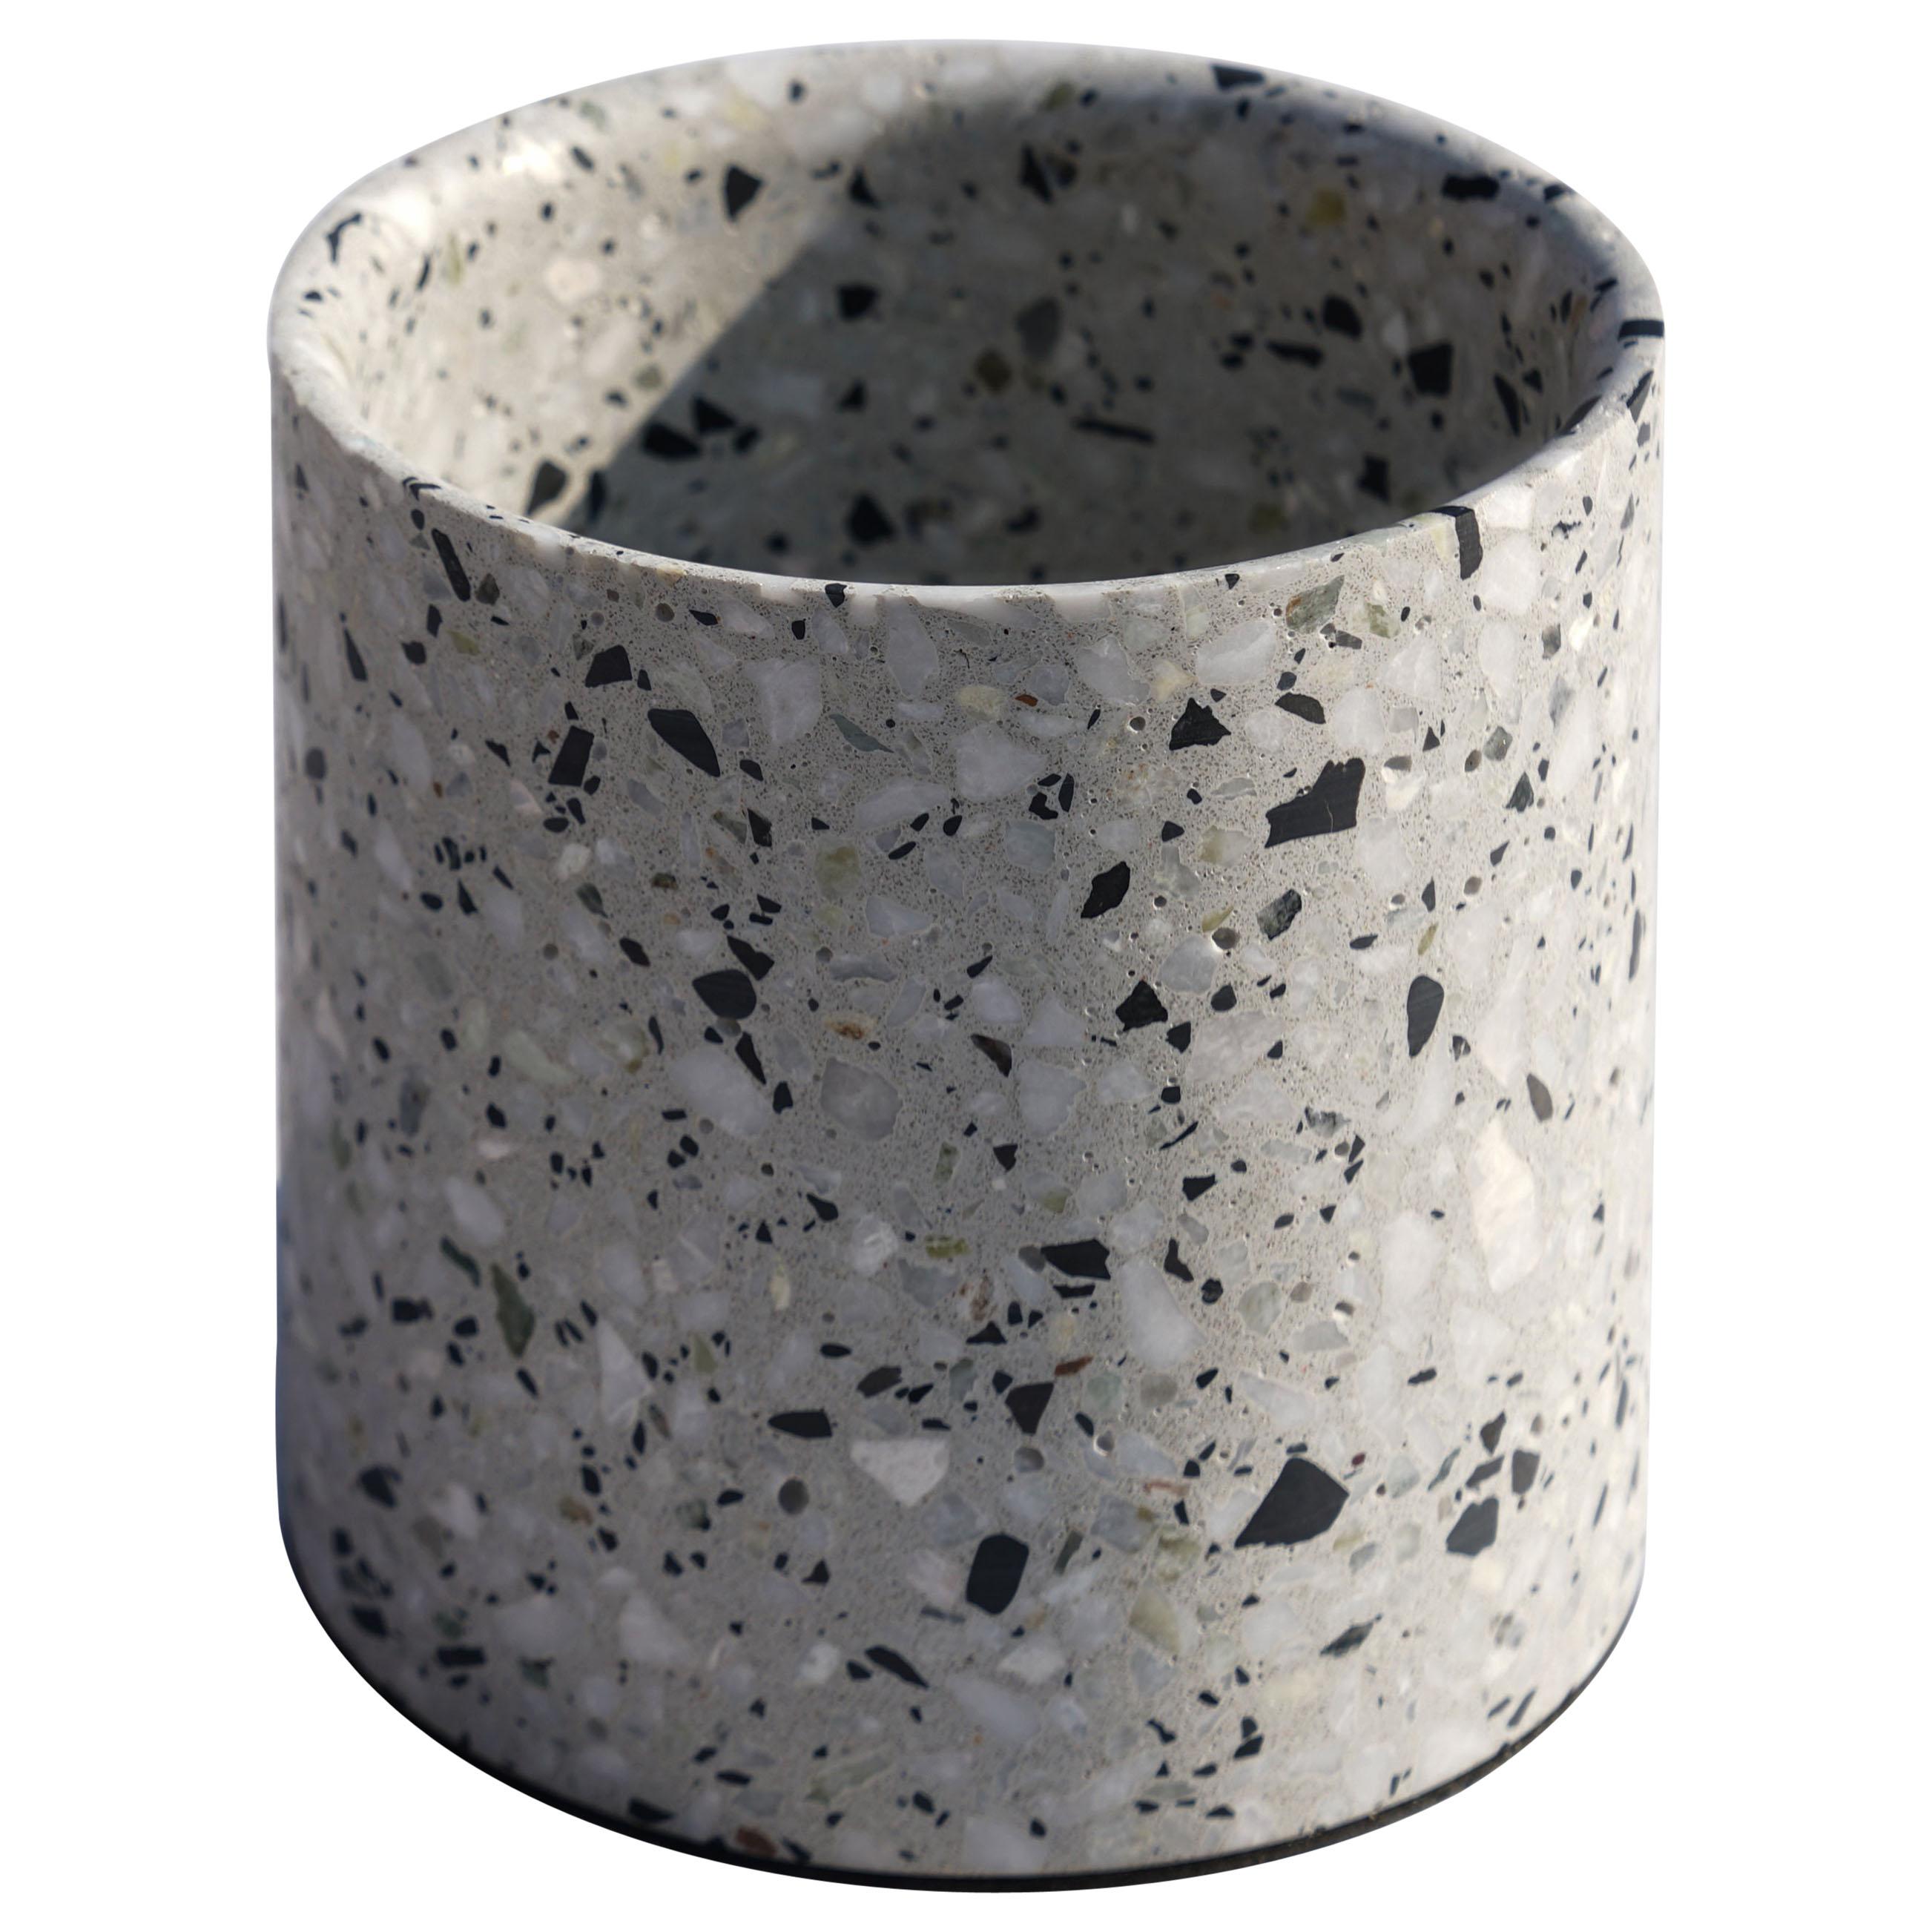 Terrazo Plant Pot, ‘Yuan, ’ White, S, from Terrazo Collection by Bentu